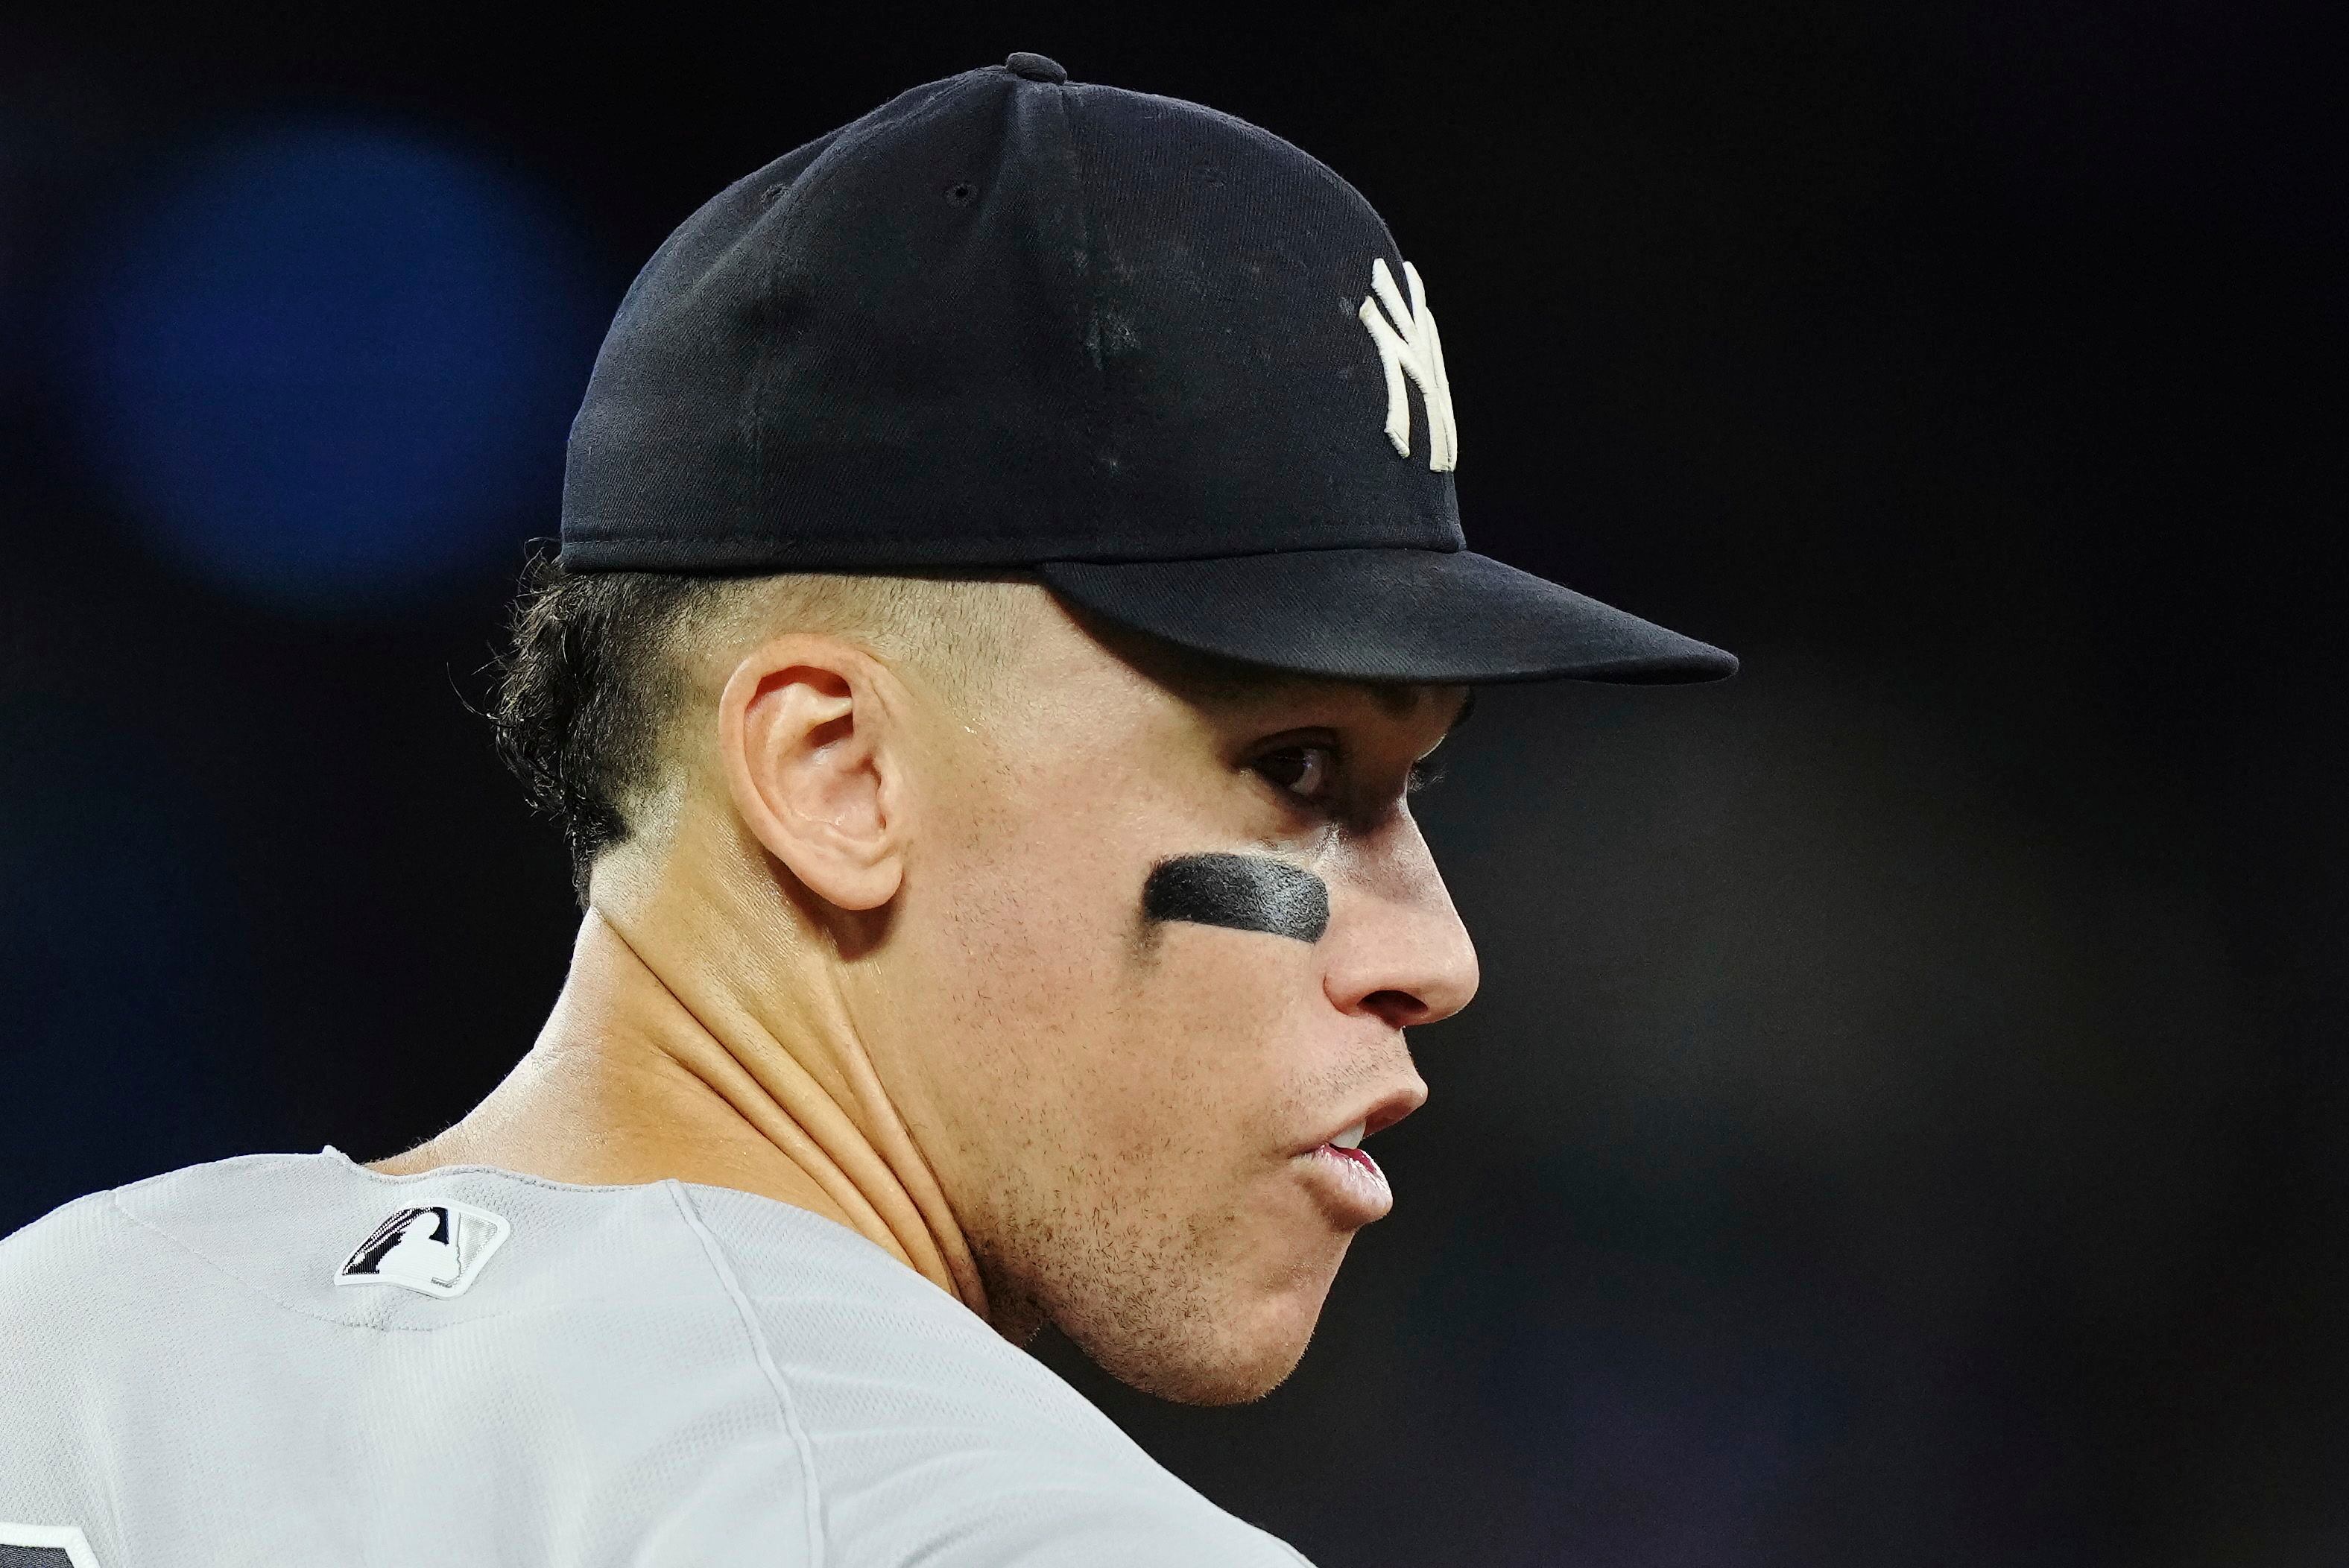 Aaron Judge hits 61st home run, ties Roger Maris for American League record